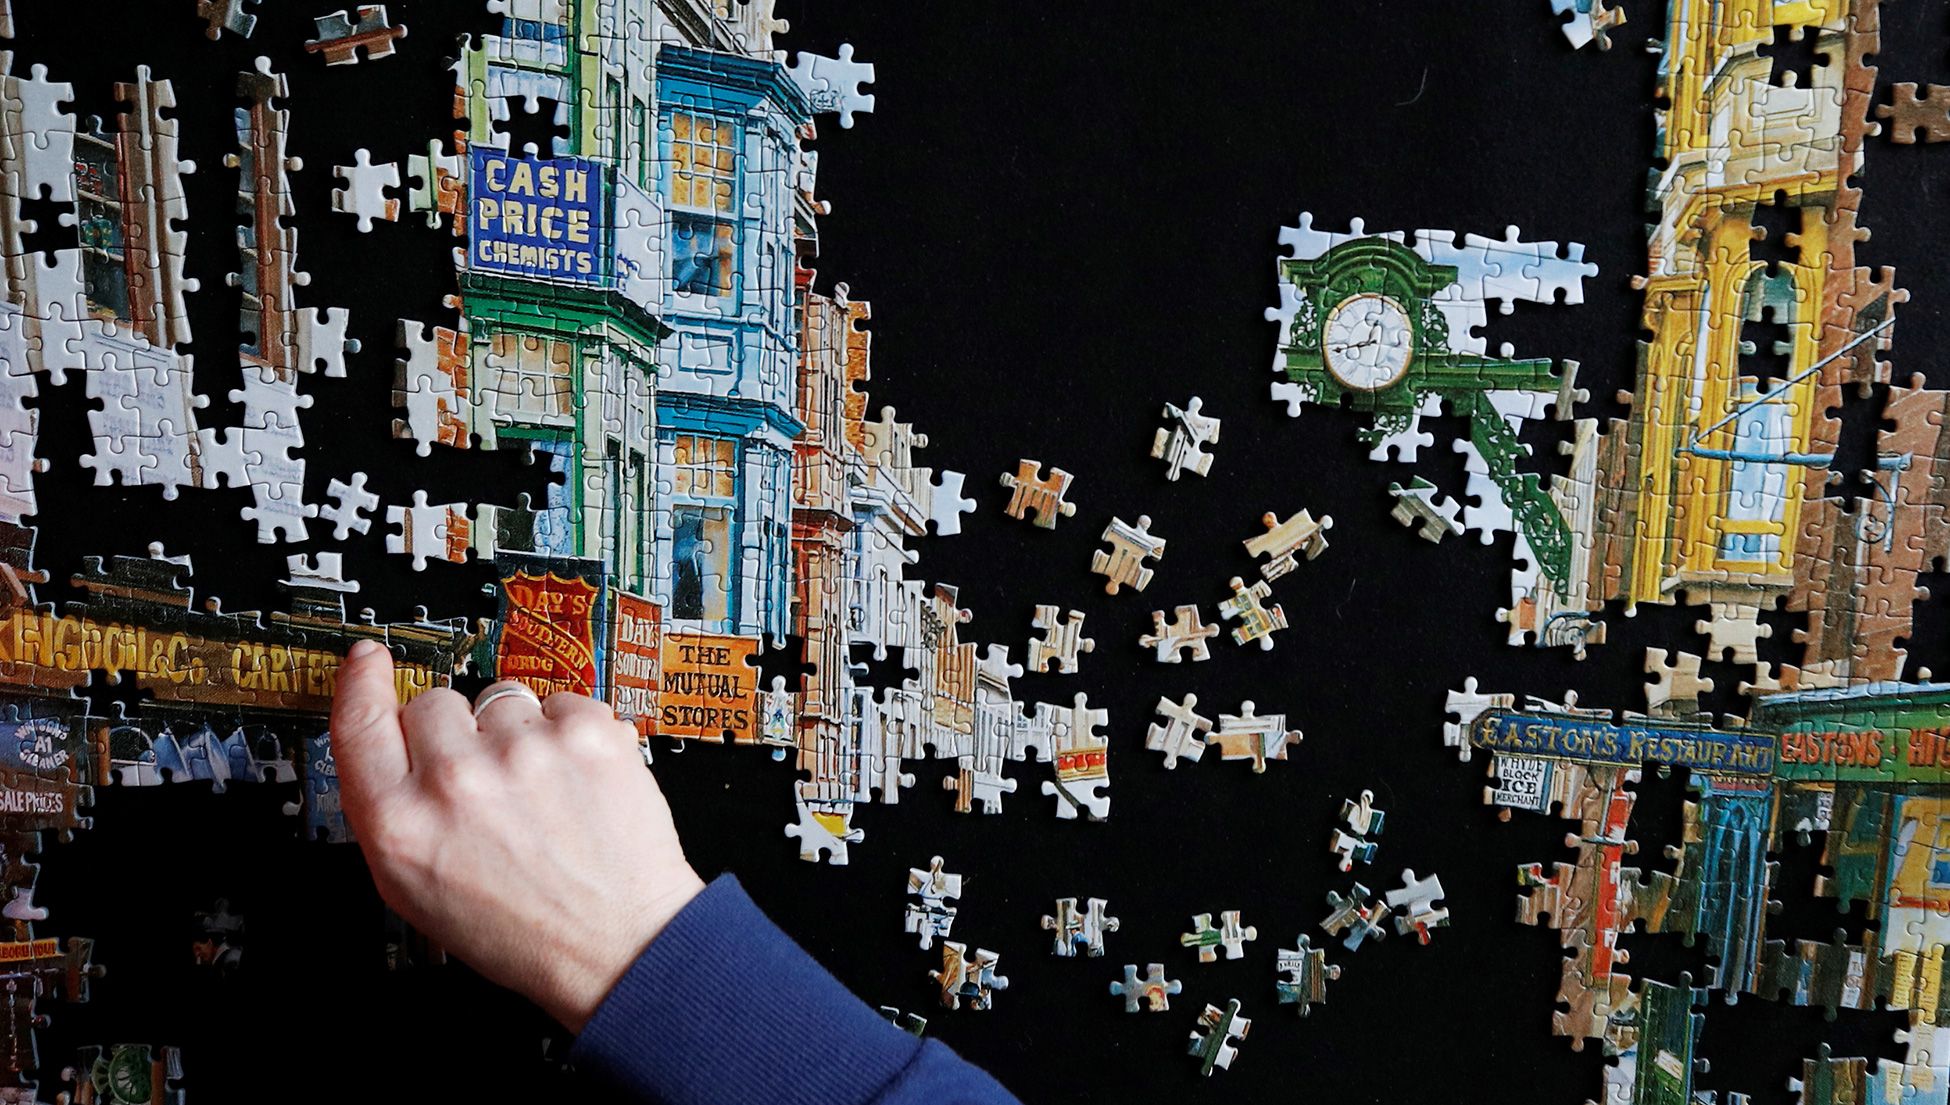 On the consolatory pleasure of jigsaws when the world is in bits | Psyche